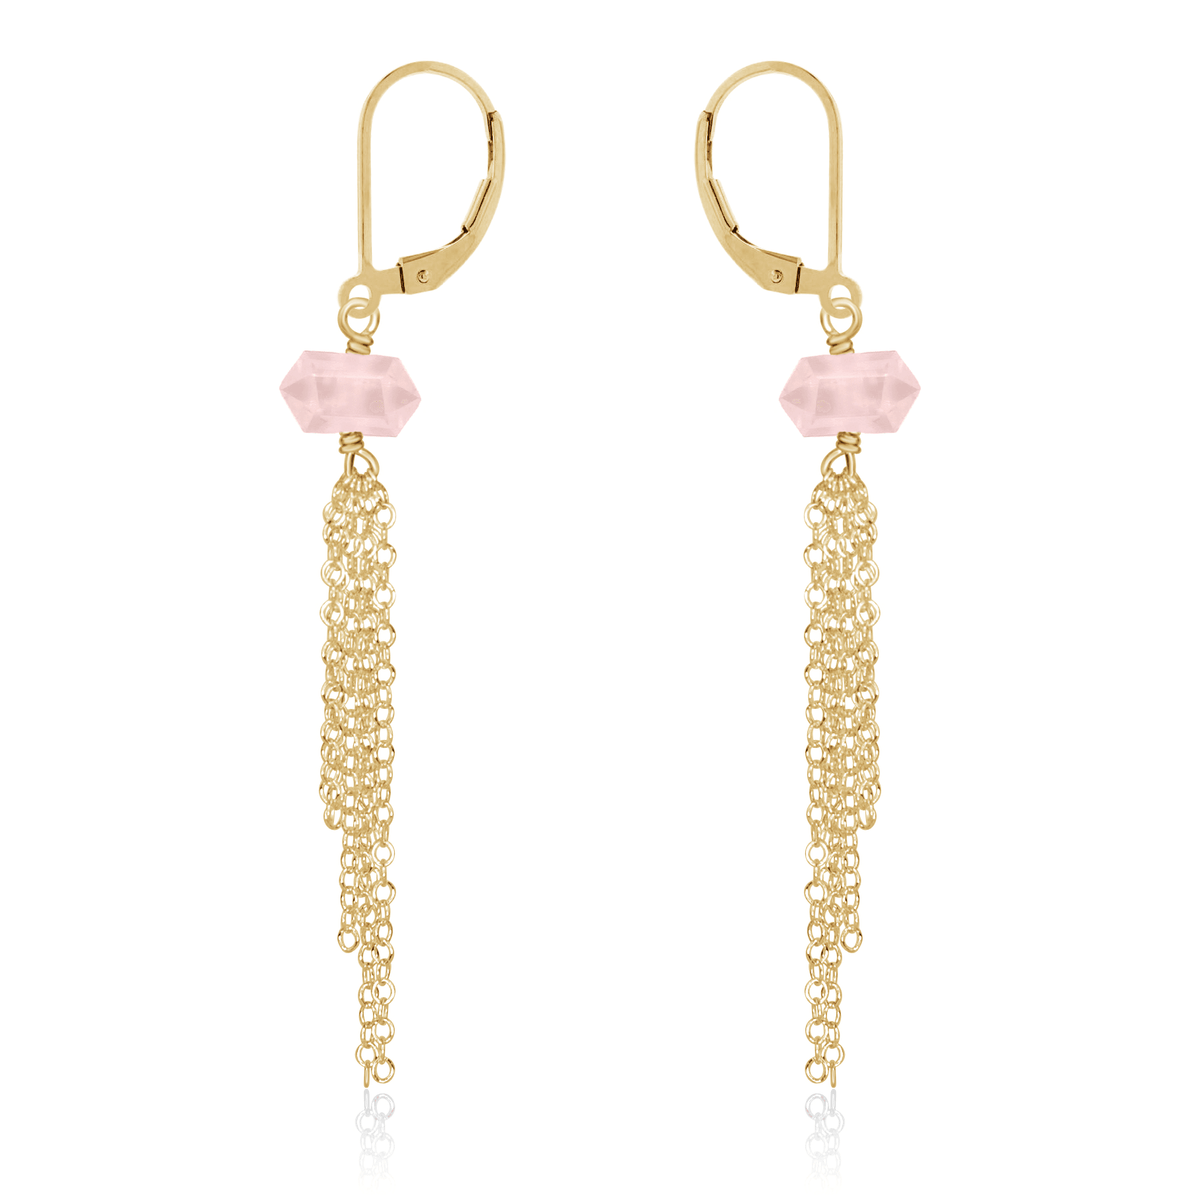 Rose Quartz Double Terminated Crystal Point Tassel Earrings - Rose Quartz Double Terminated Crystal Point Tassel Earrings - 14k Gold Fill - Luna Tide Handmade Crystal Jewellery